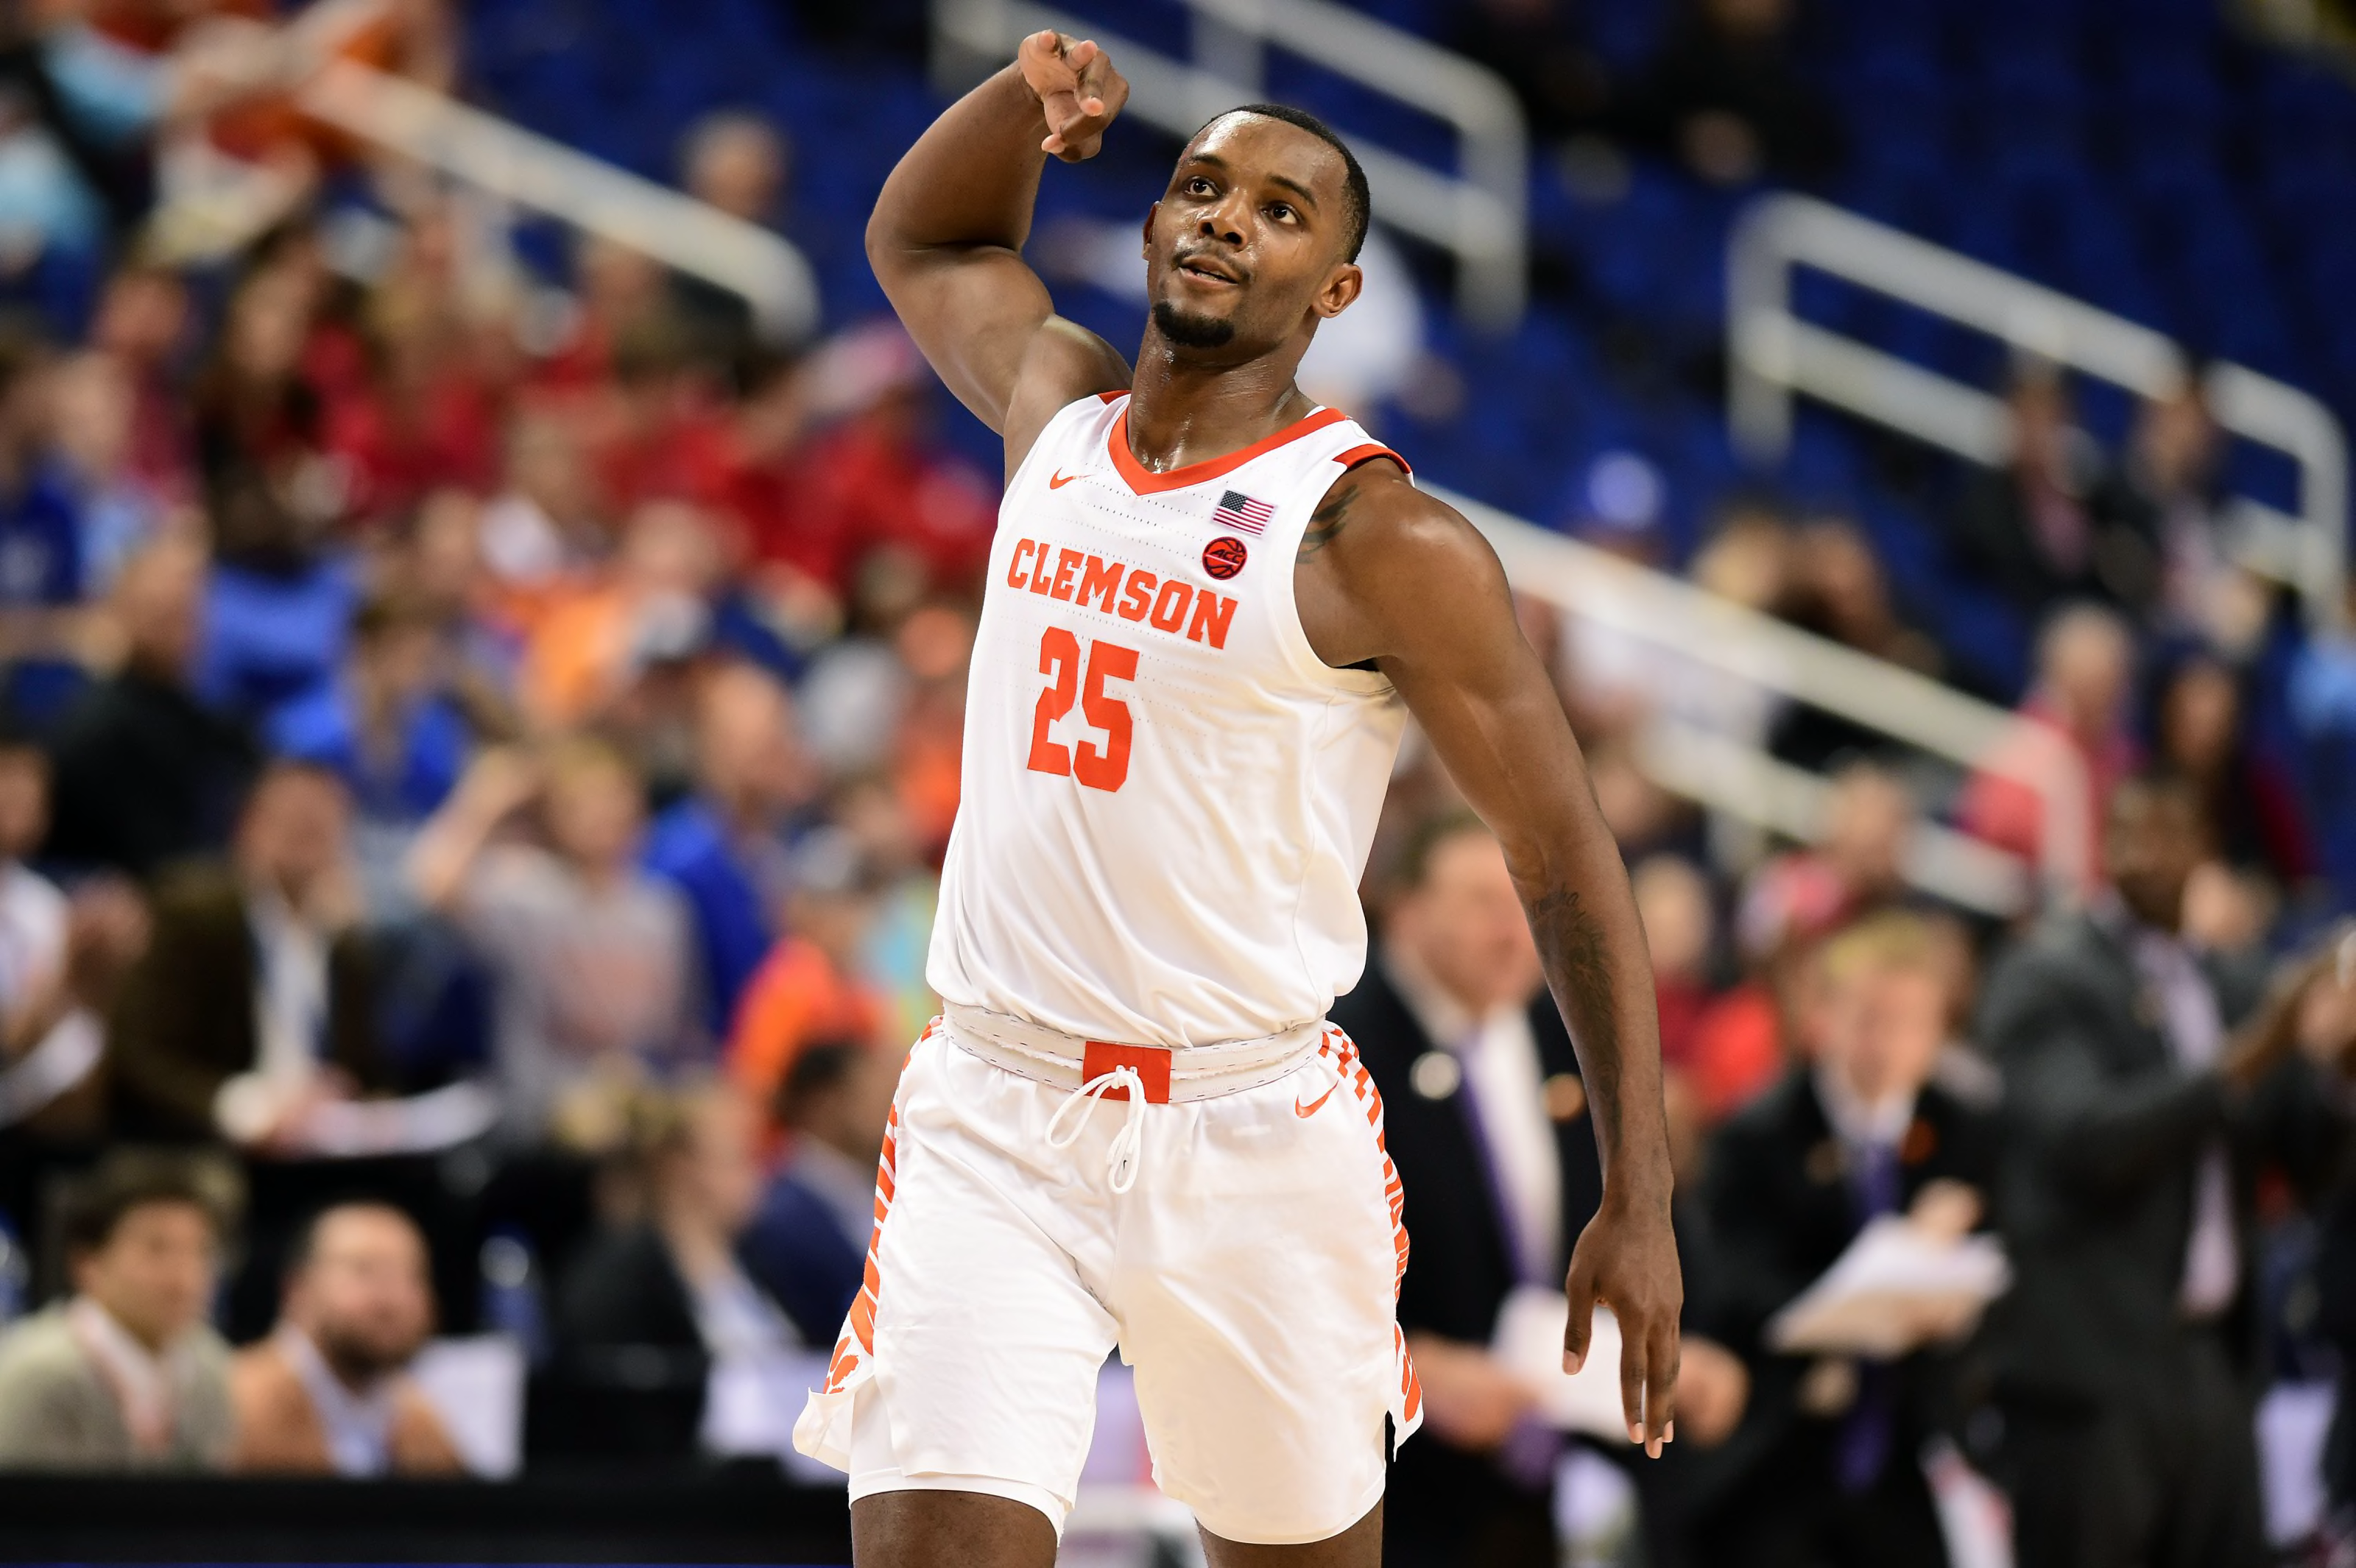 Clemson Basketball: 2020-21 season preview for the Tigers - Page 4